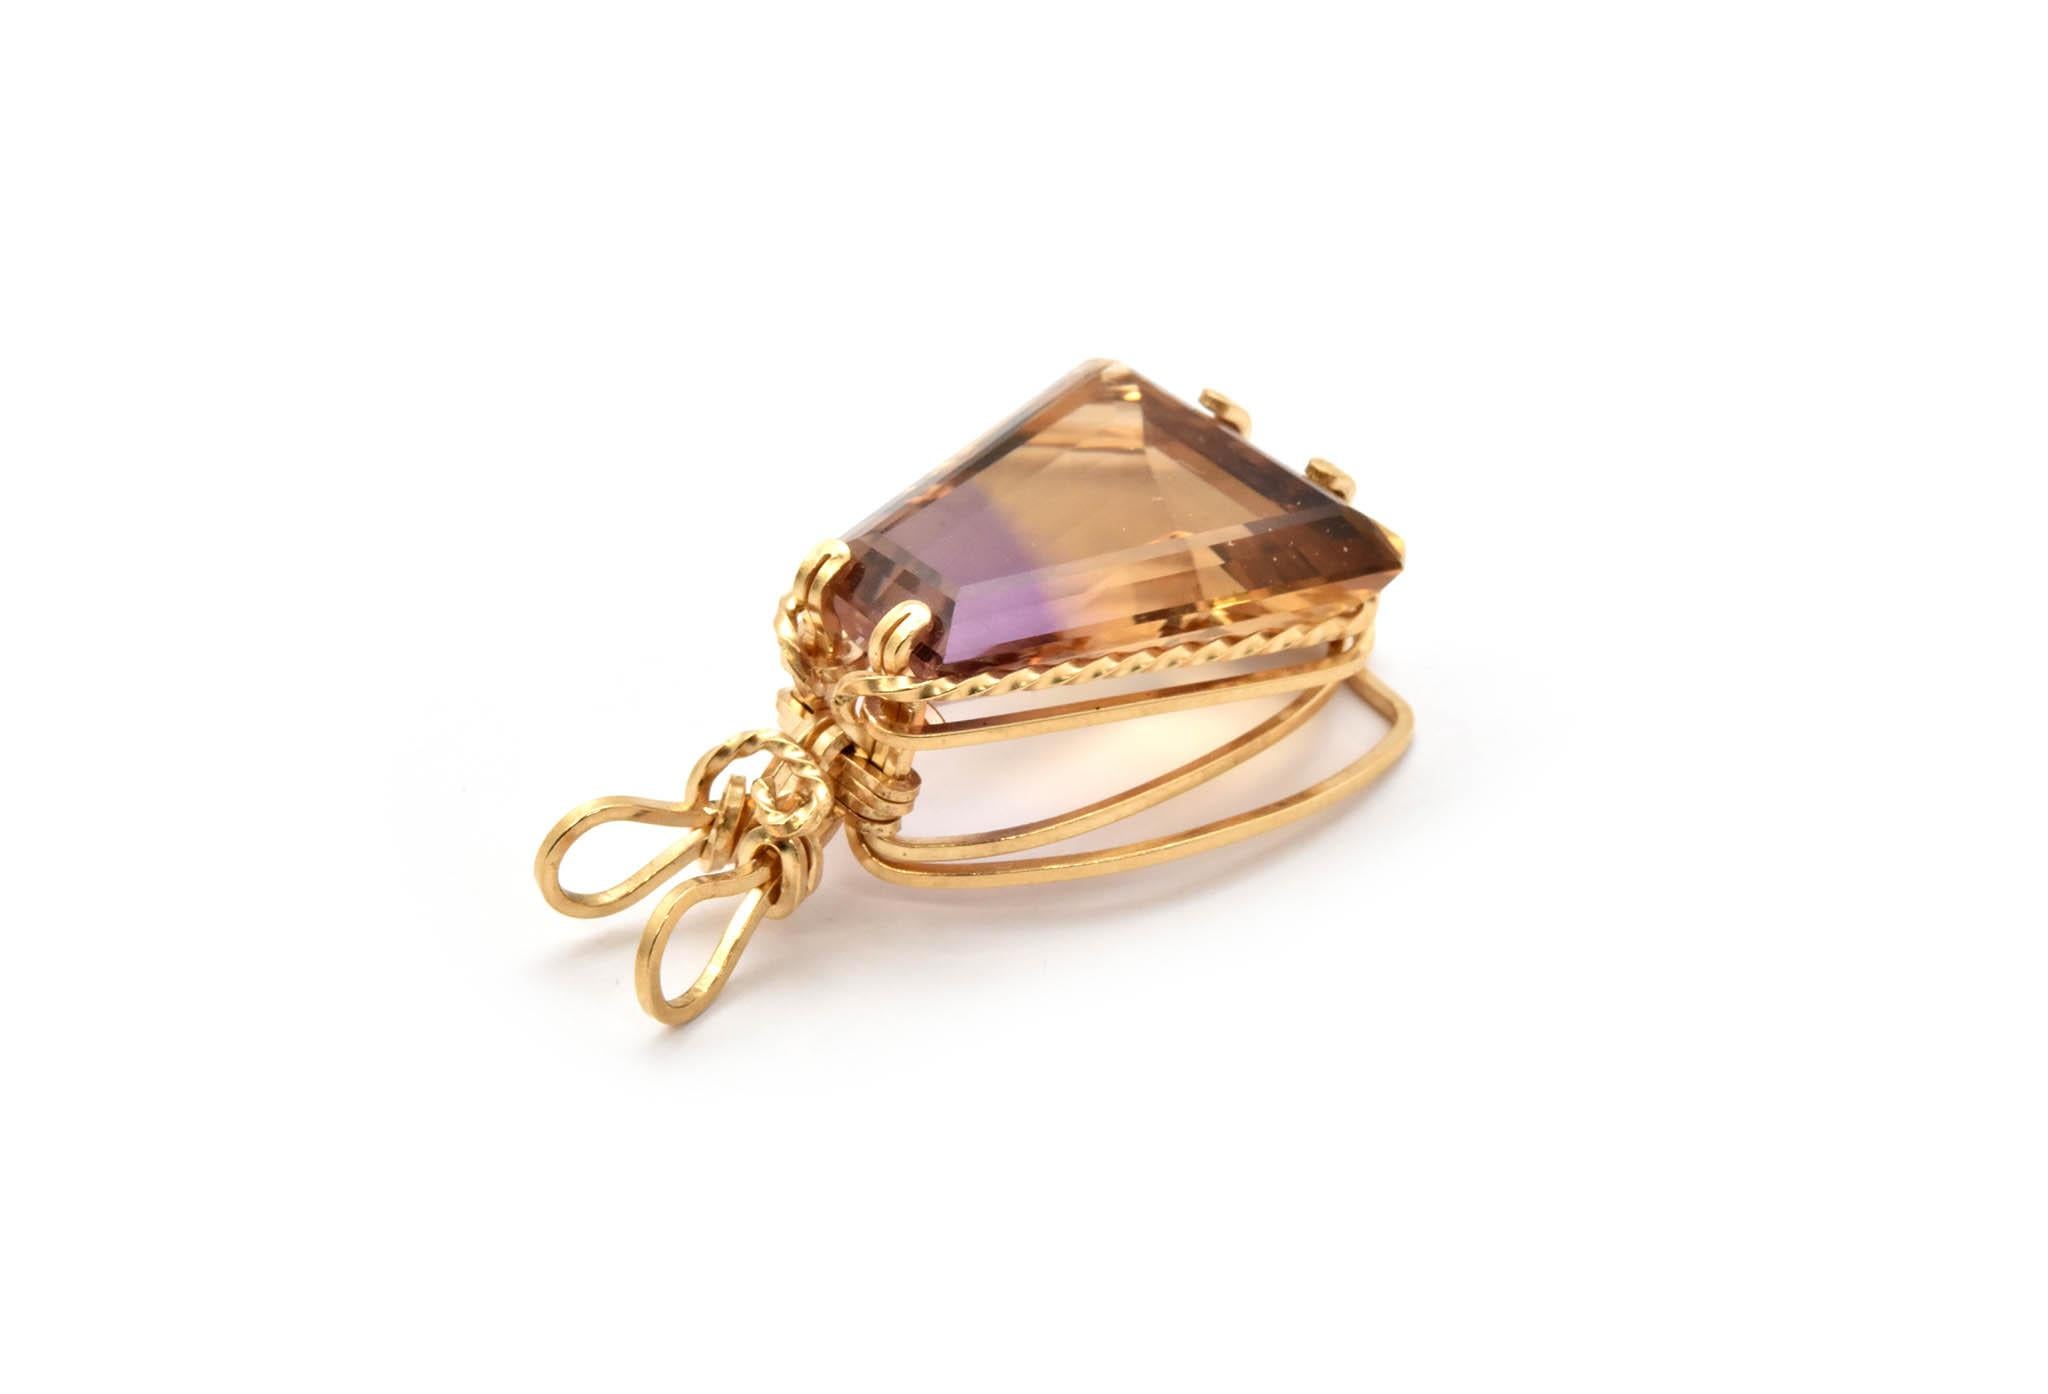 This 14k yellow gold wire wrapped pendant holds a four-sided polygonal faceted ametrine. The ametrine measures 19x8.9x21.2mm. The pendant is 39.2x22.2mm and weighs 5.7 grams.